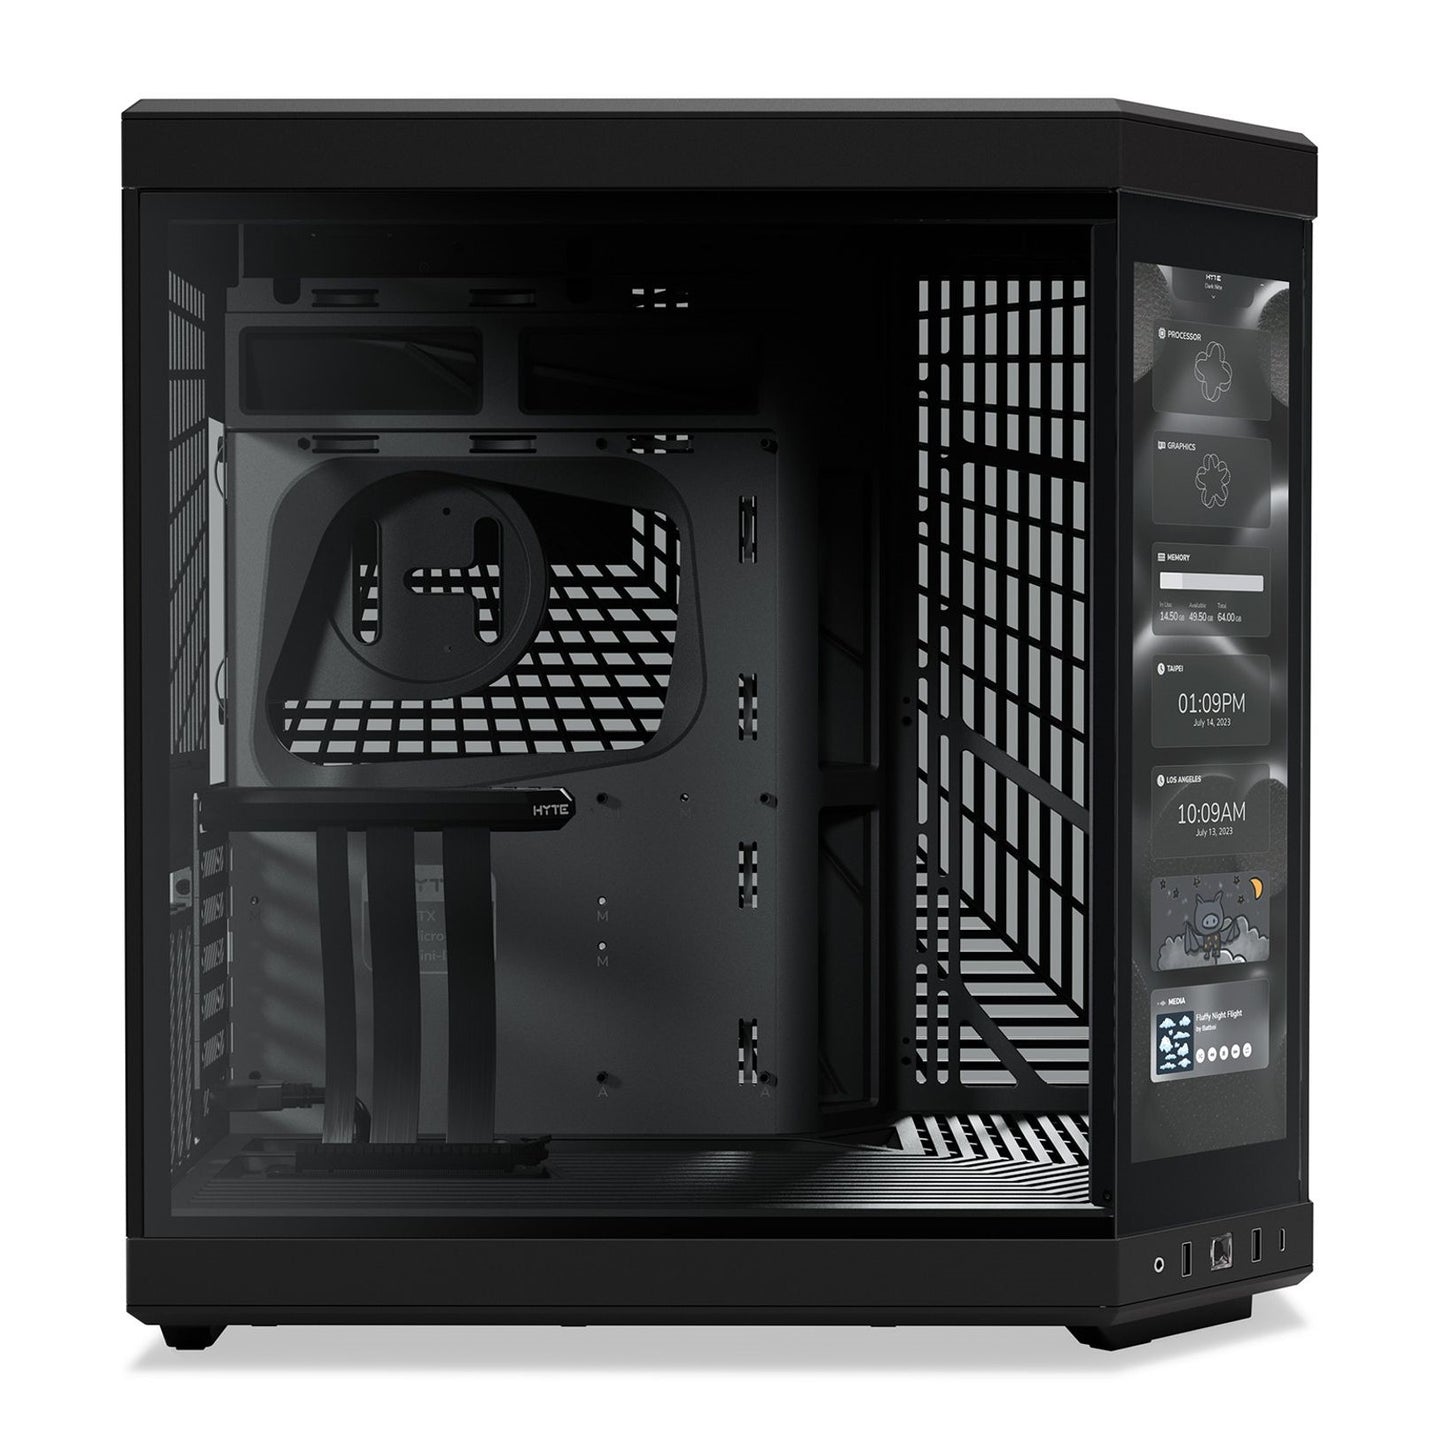 HYTE Y70 Touch Full Black/ Full White Dual Chamber Mid-Tower Chassis CASE - 3 Yrs Warranty